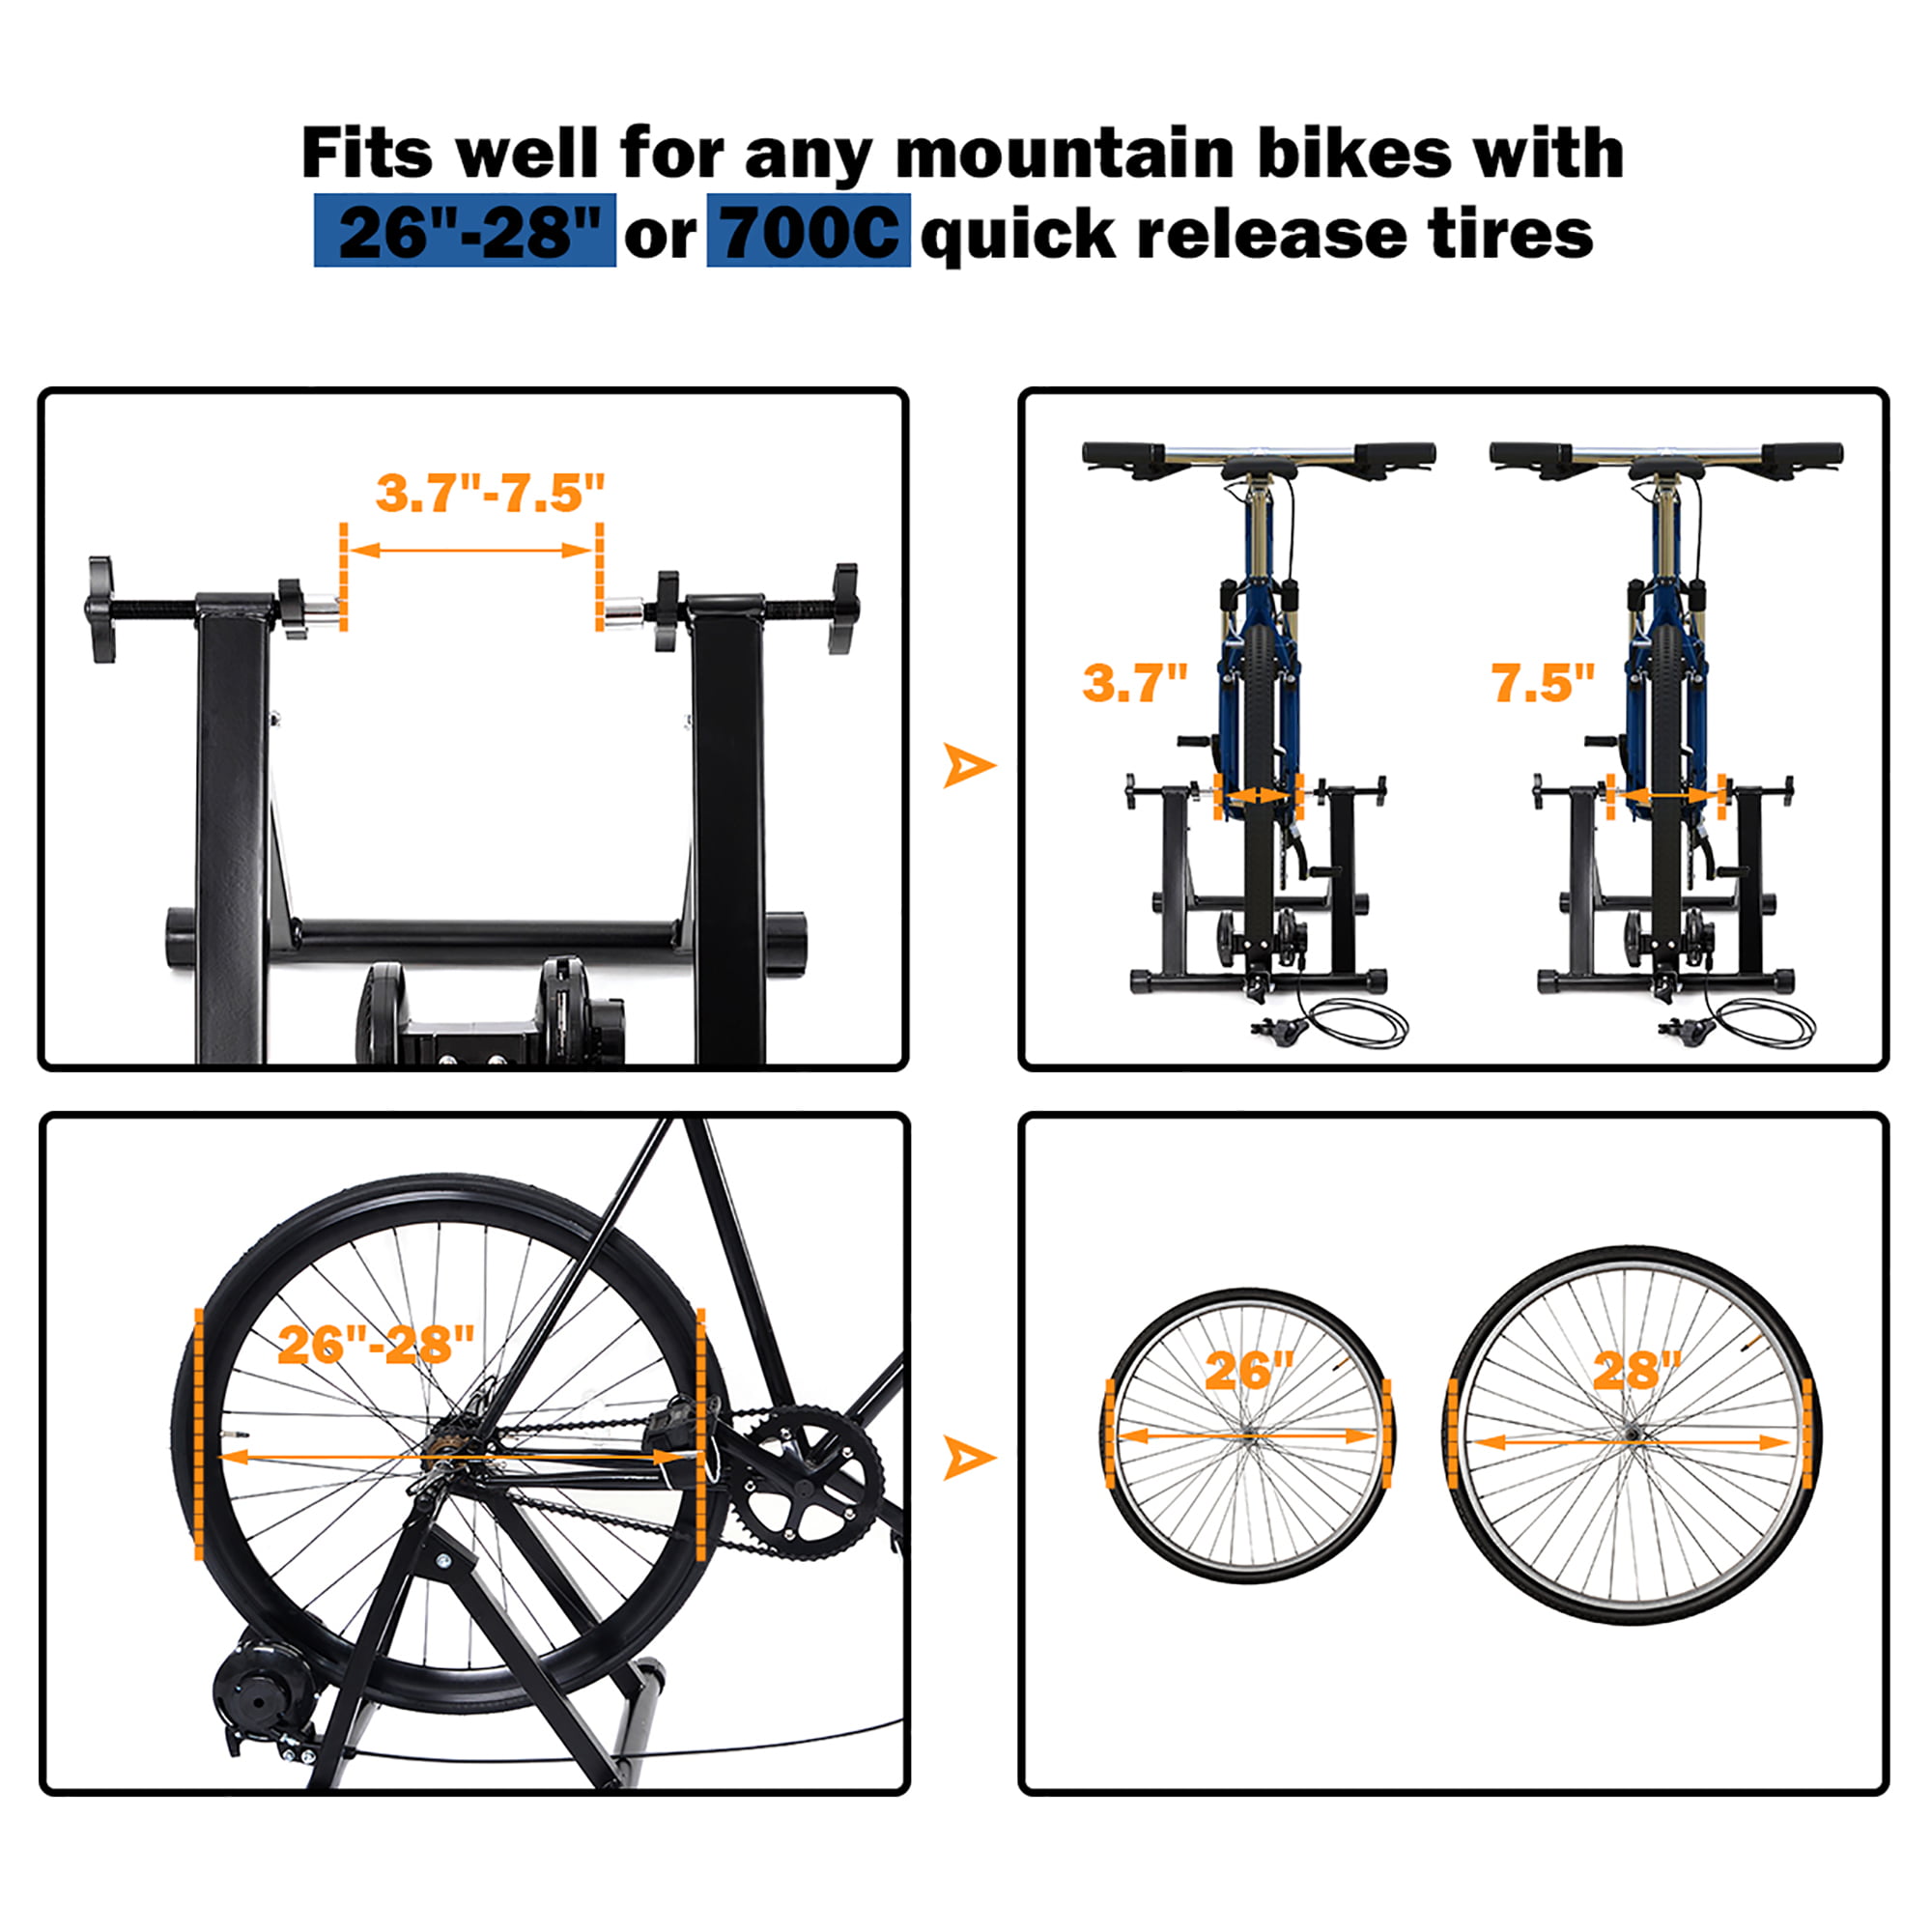 P/N: ET-HOME008- Black Indoor Bike Trainer Stand Portable Magnetic Stainless Steel Exercise Bicycle Bike Trainer Stand Fit 26-28,700C Wheels HTTMT 